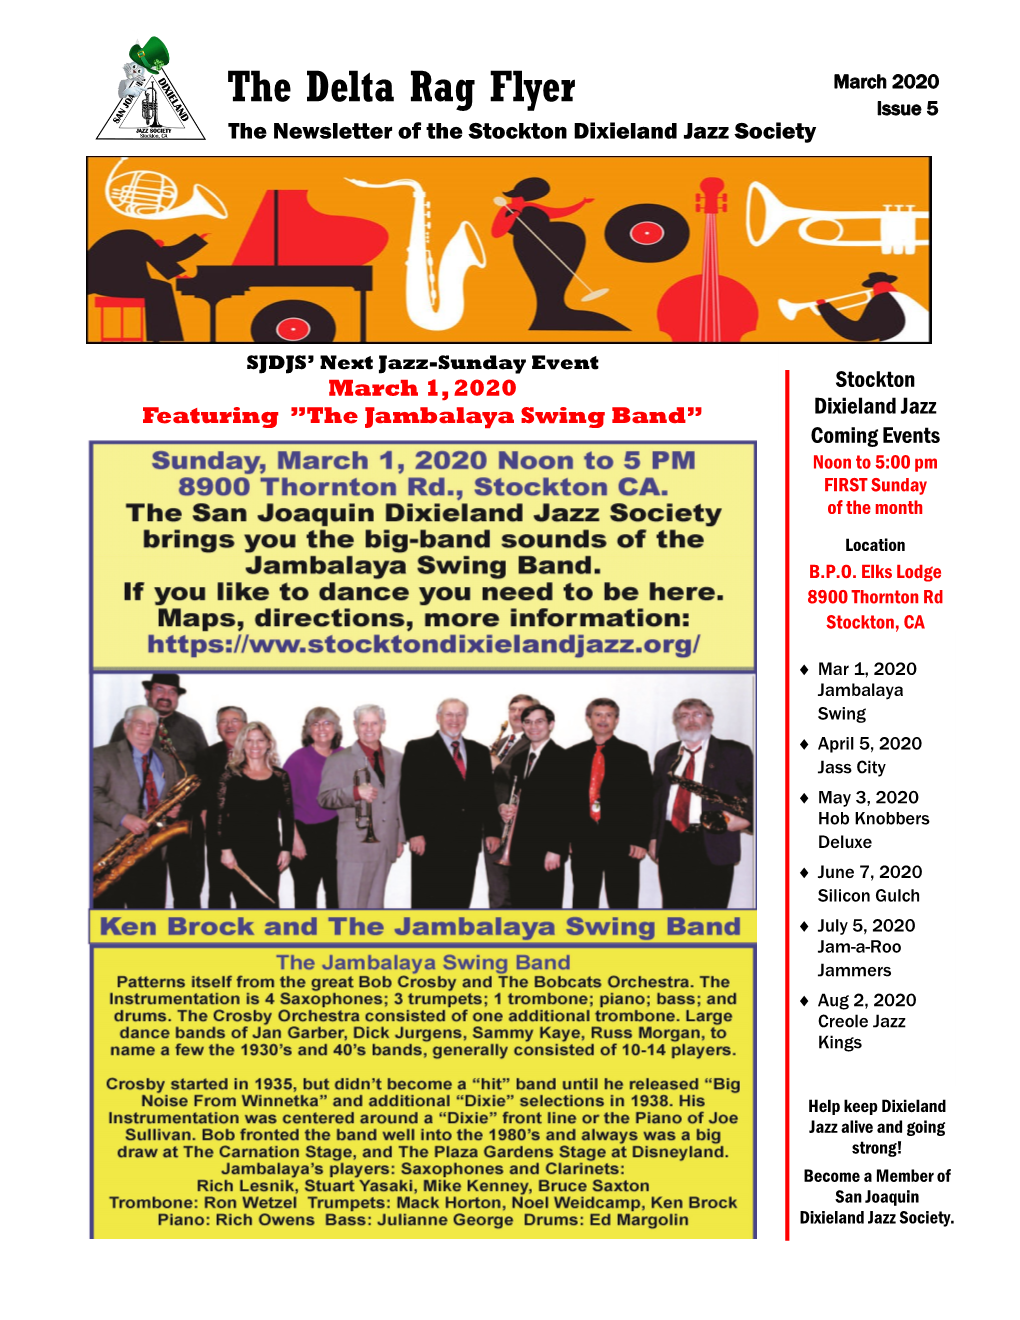 The Delta Rag Flyer Issue 5 the Newsletter of the Stockton Dixieland Jazz Society